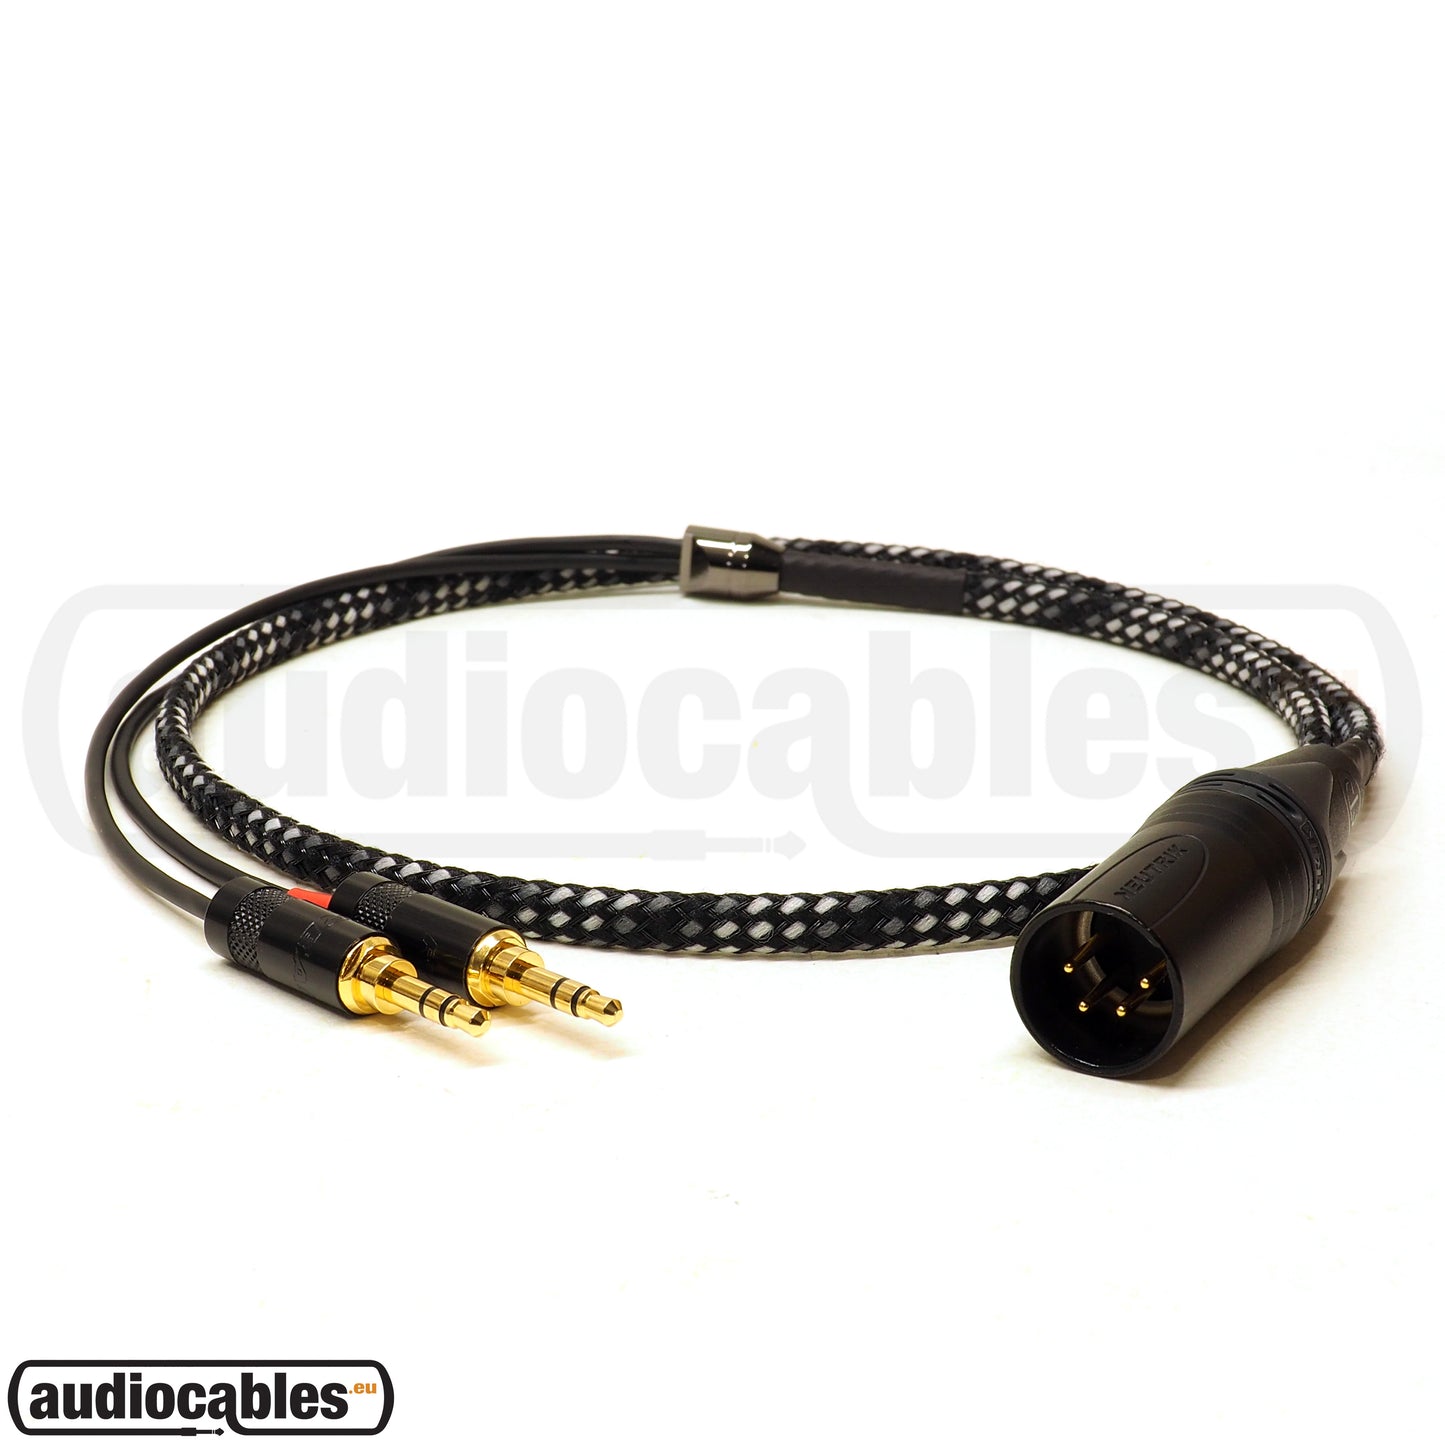 Mogami Balanced Cable for Hifiman Headphones (TRRRS, XLR & TRRS to dual 3.5mm)